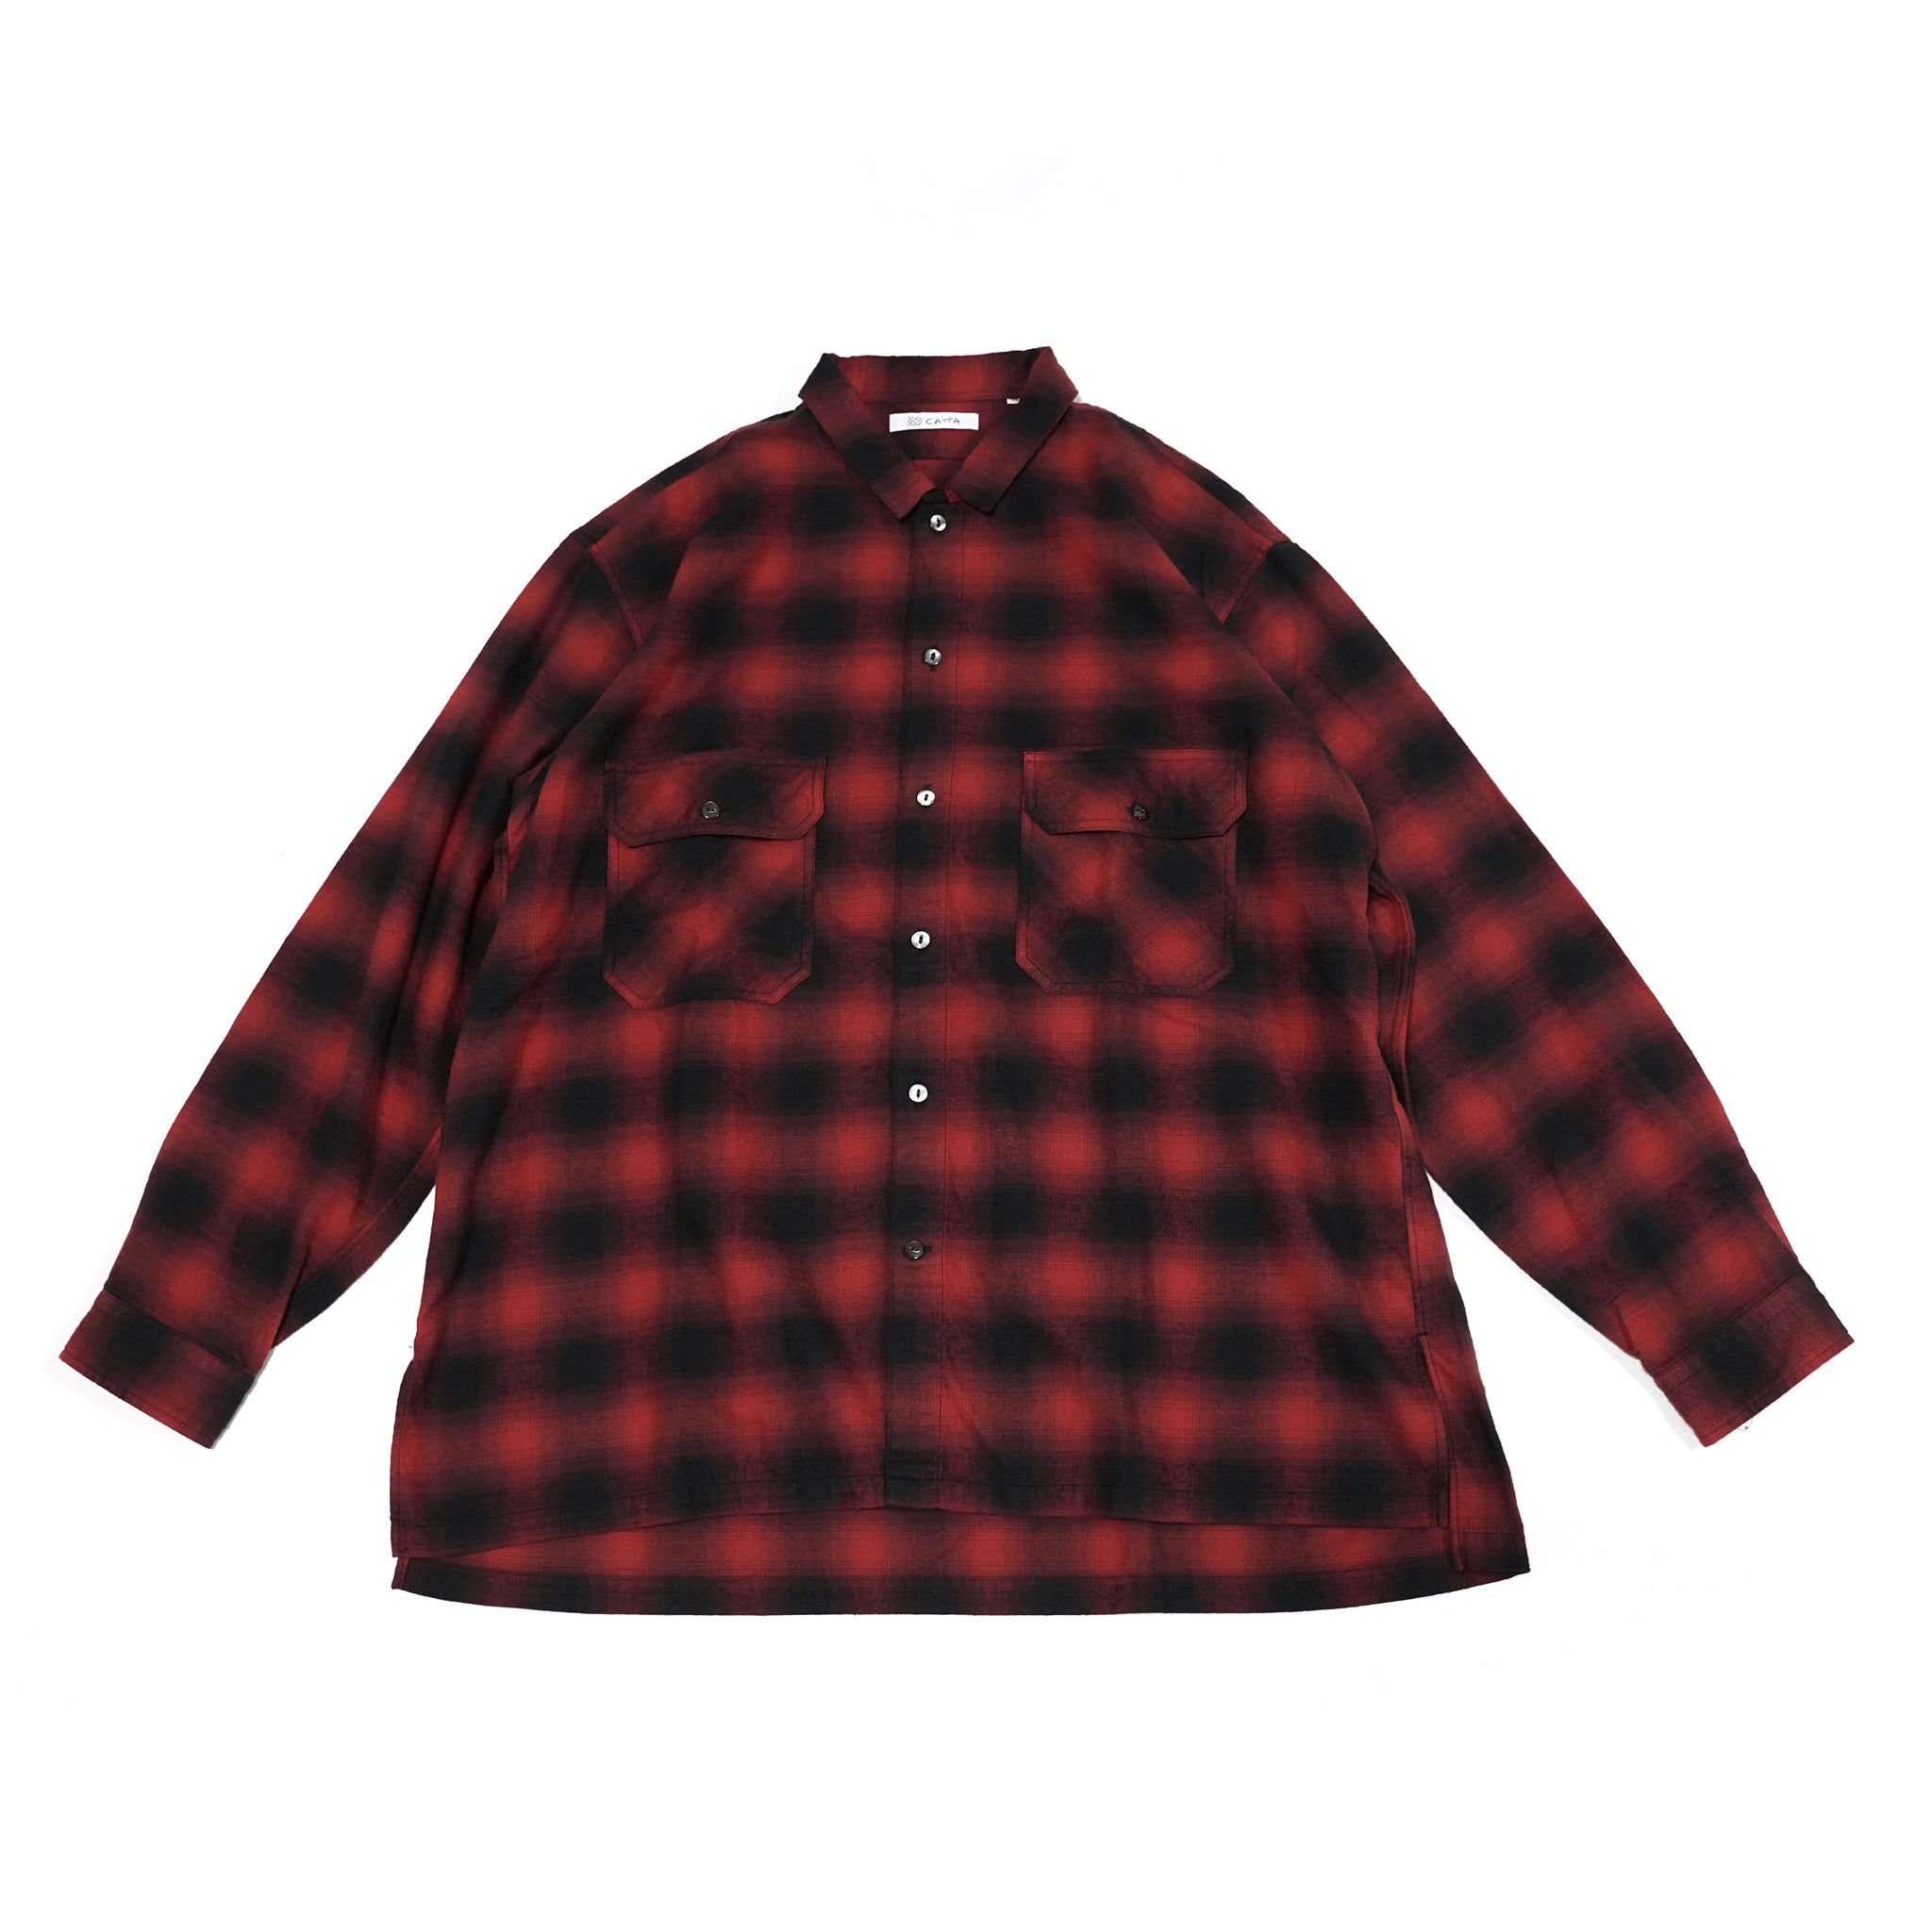 No:WP-02_B | Name:W POCKET SHIRTS-OMBRE CHECK | Color:Red【CATTA_カッタ】